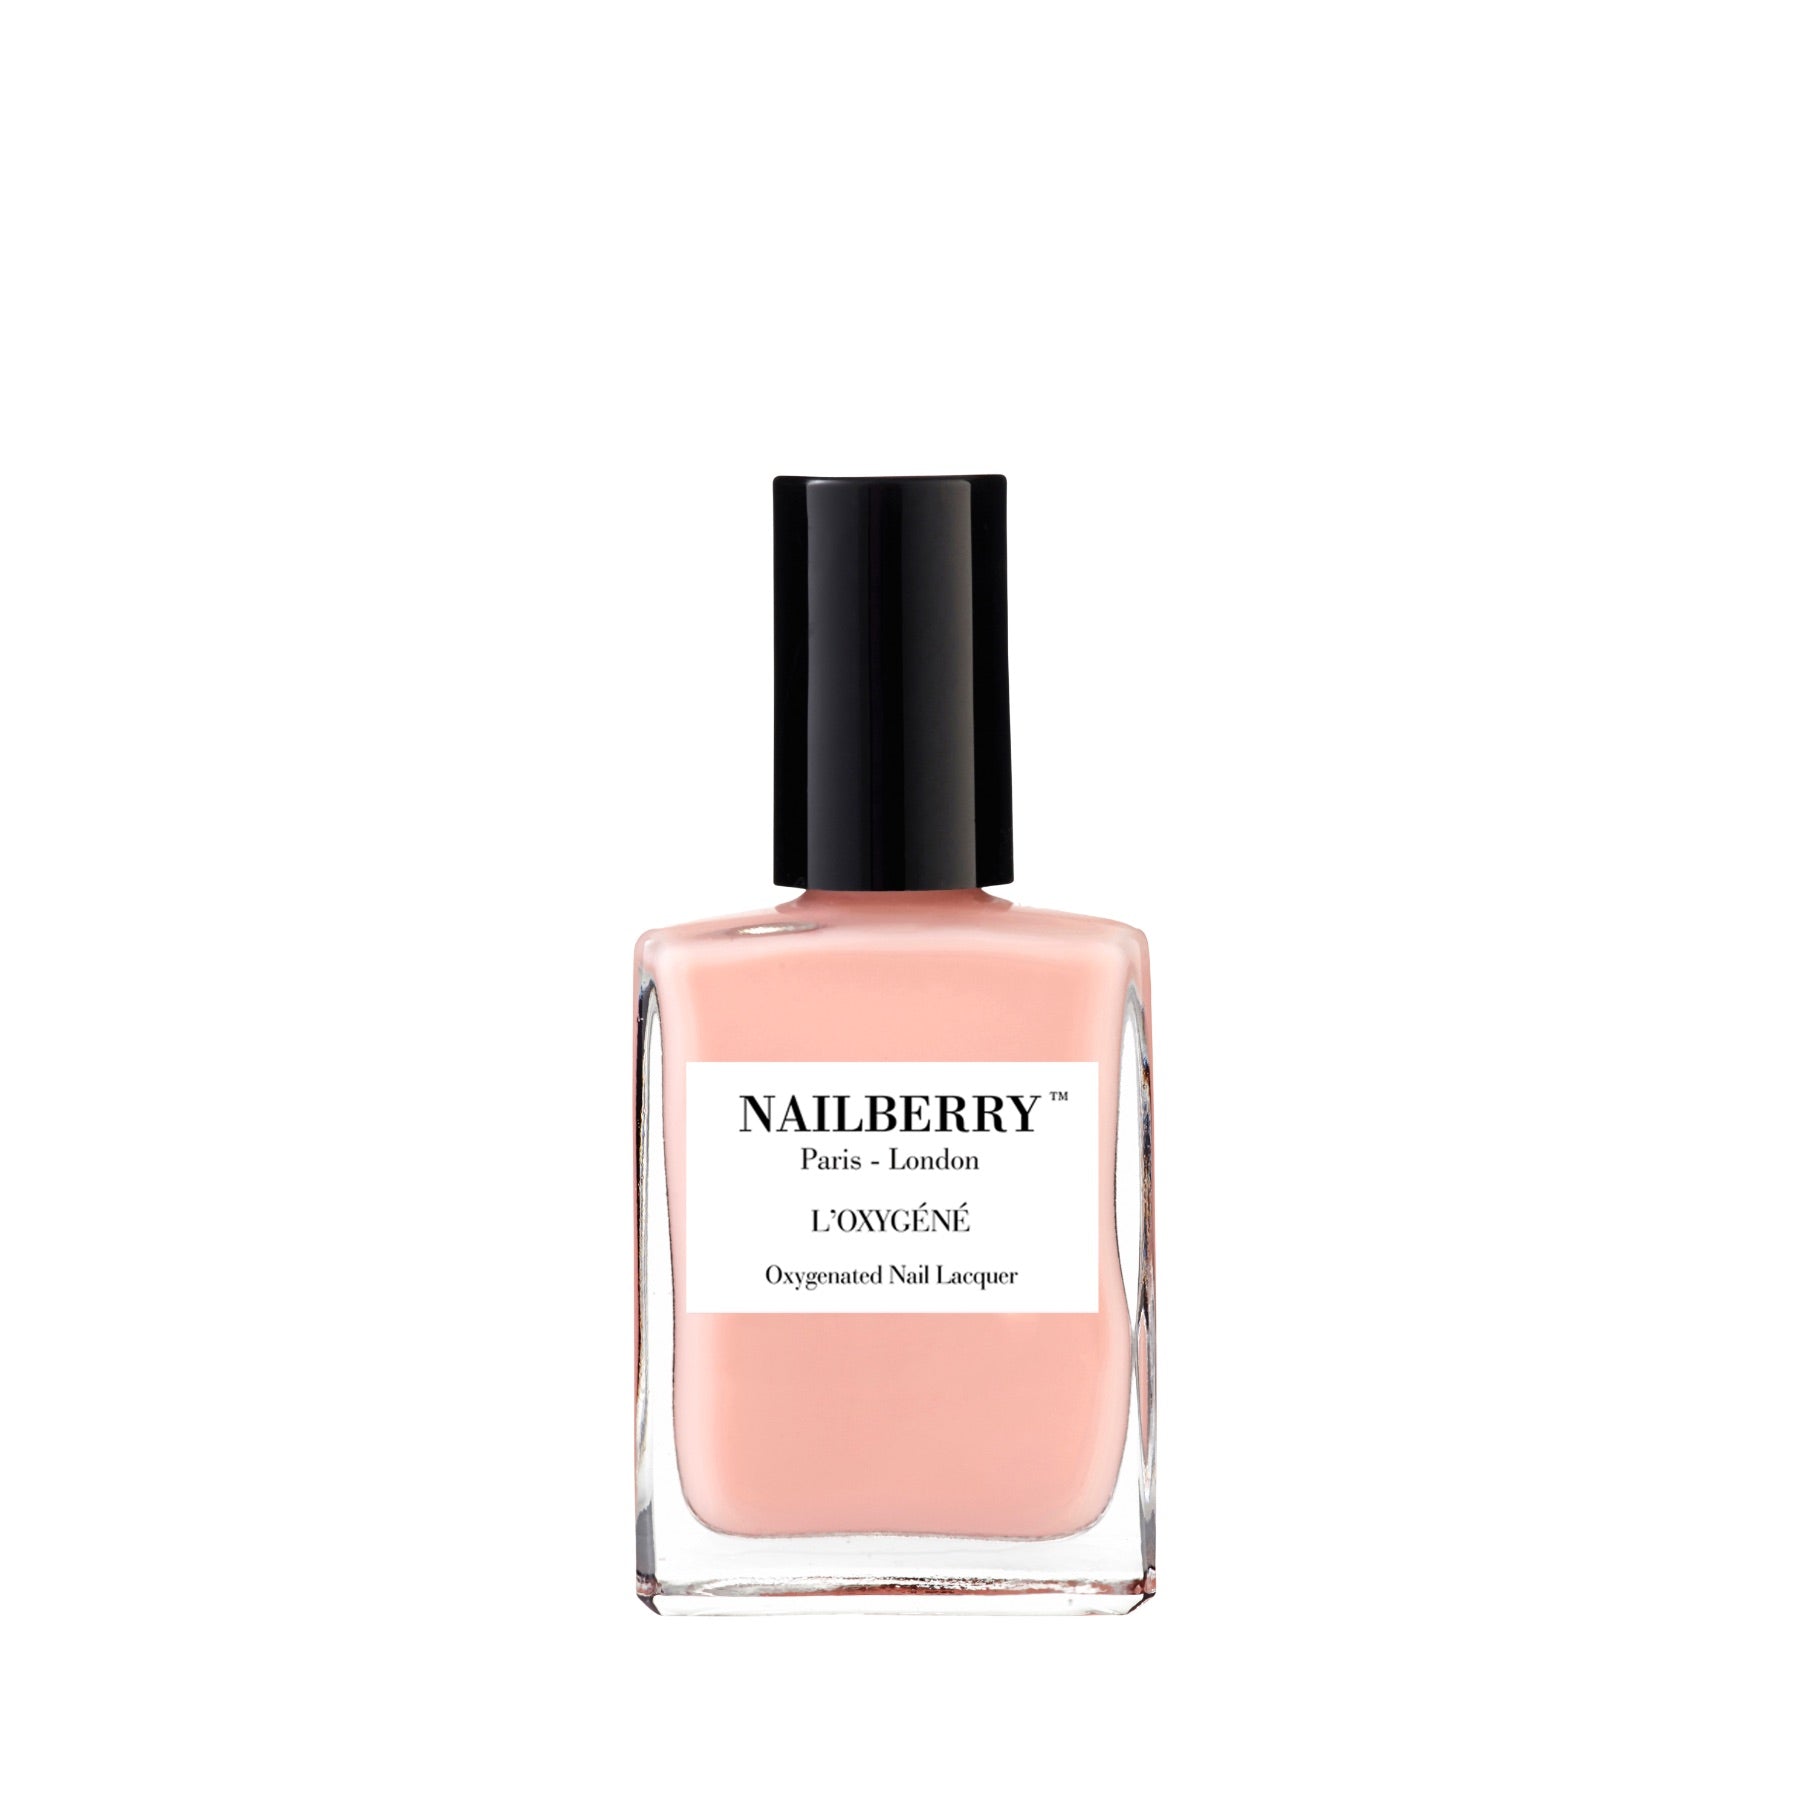 Nailberry neglelak A touch Of Powder